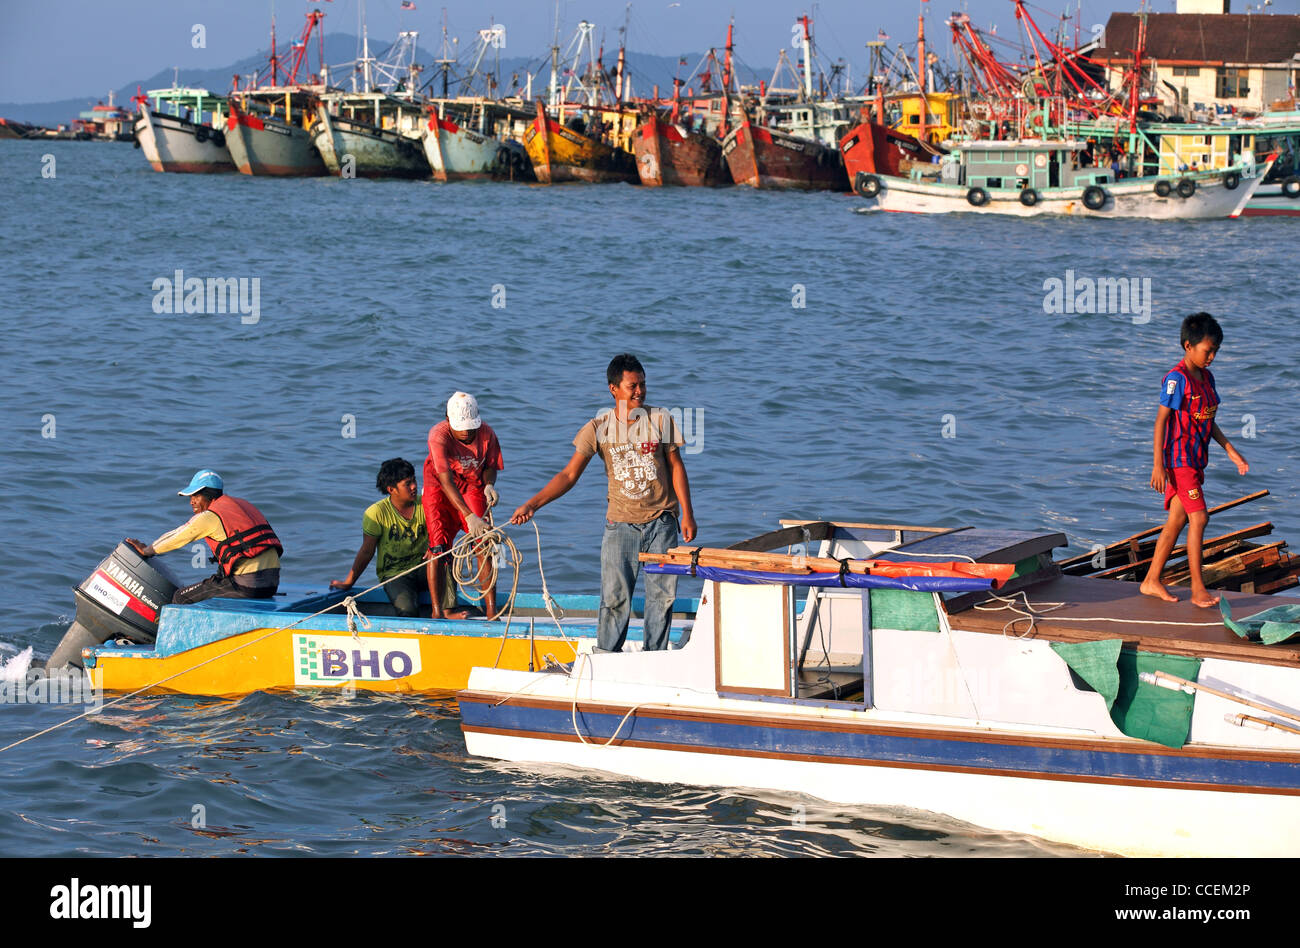 Wooden fishing boat fleet and water taxis on the waterfront in Kota Kinabalu, Borneo, Malaysia Stock Photo